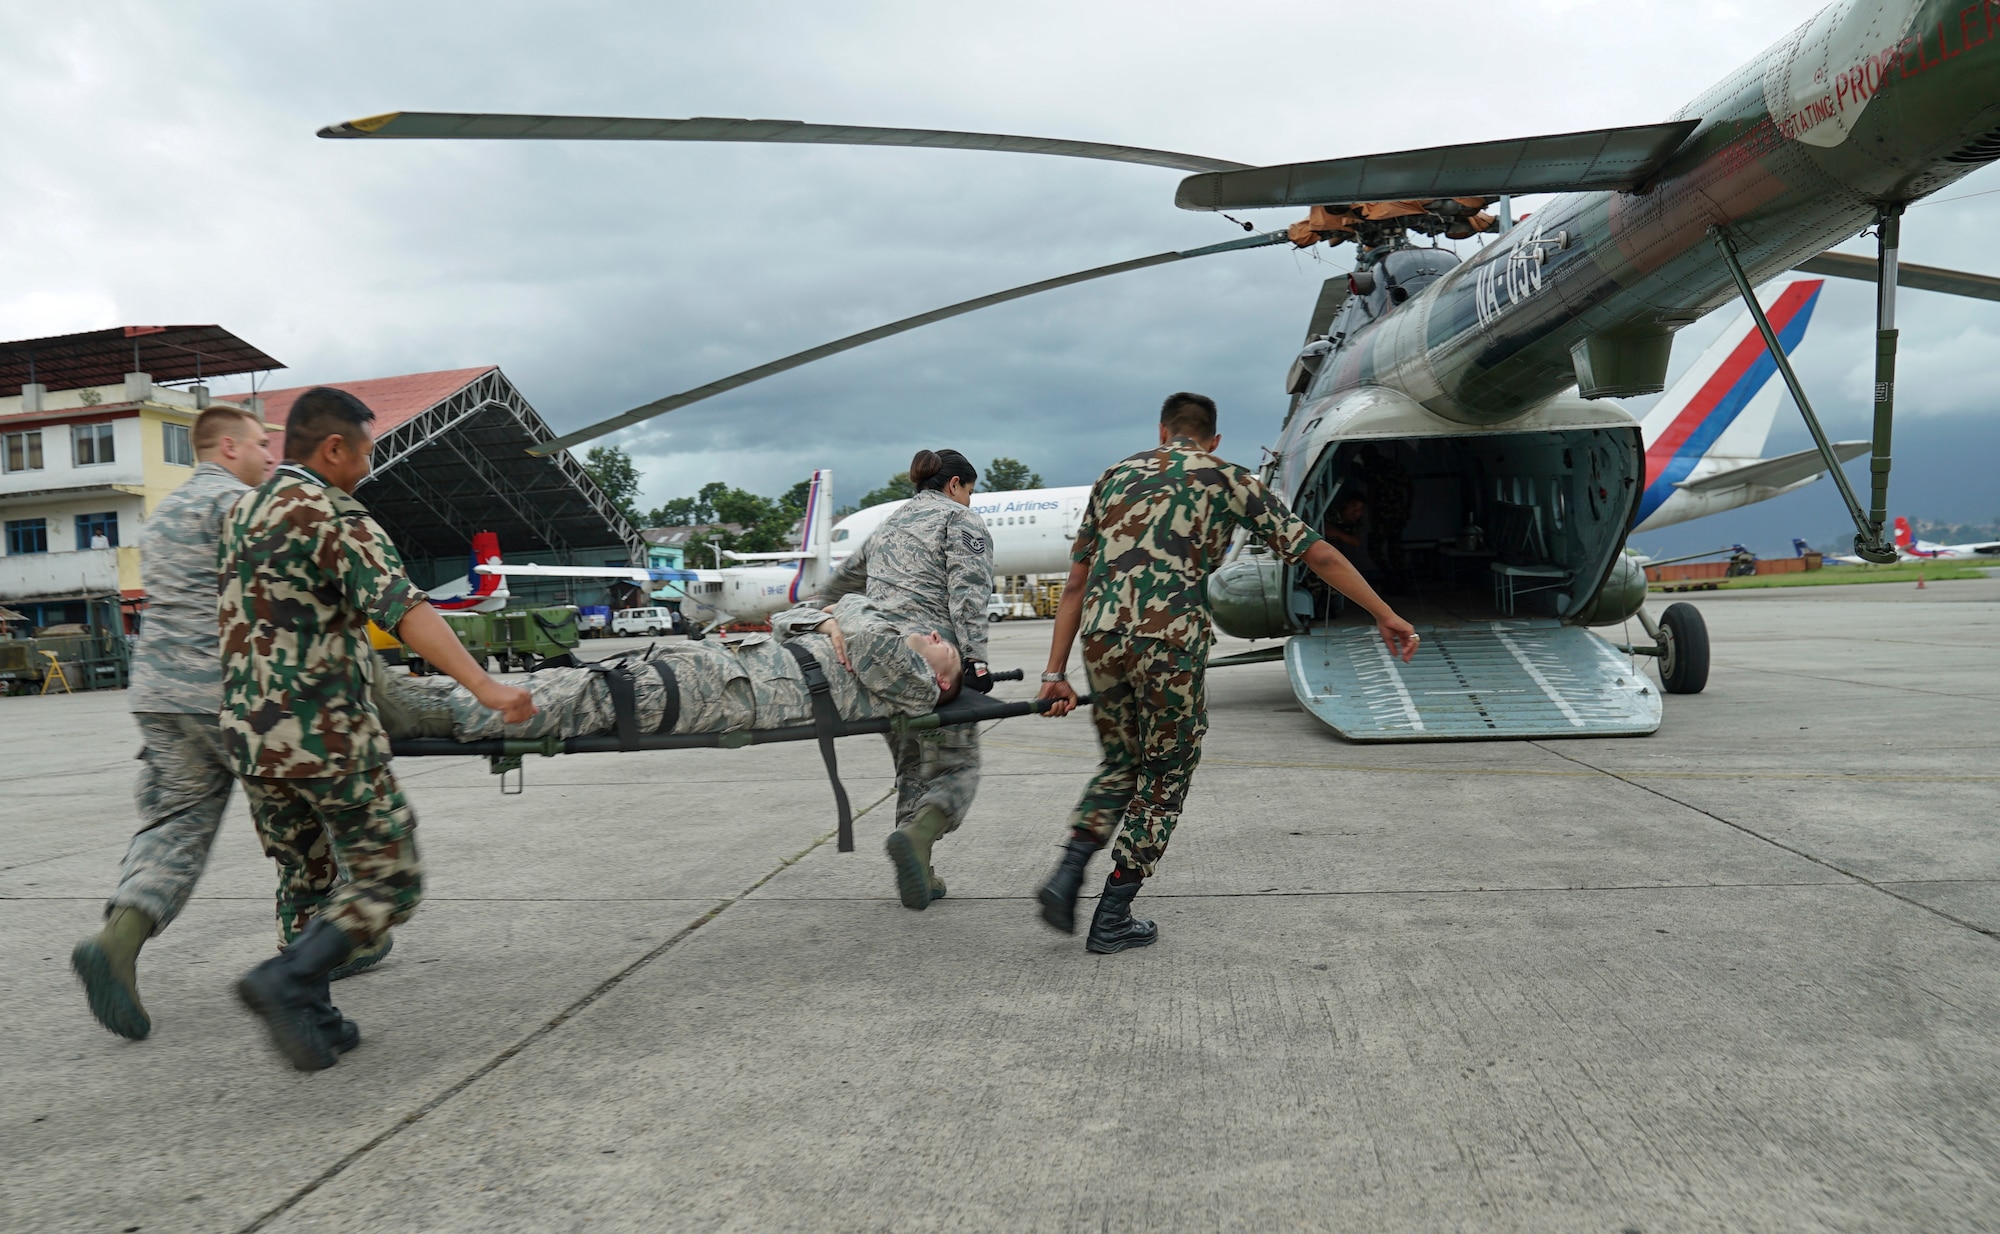 Preparing for tomorrow by building partnerships today: USAF collaborates with Nepalese on disaster response